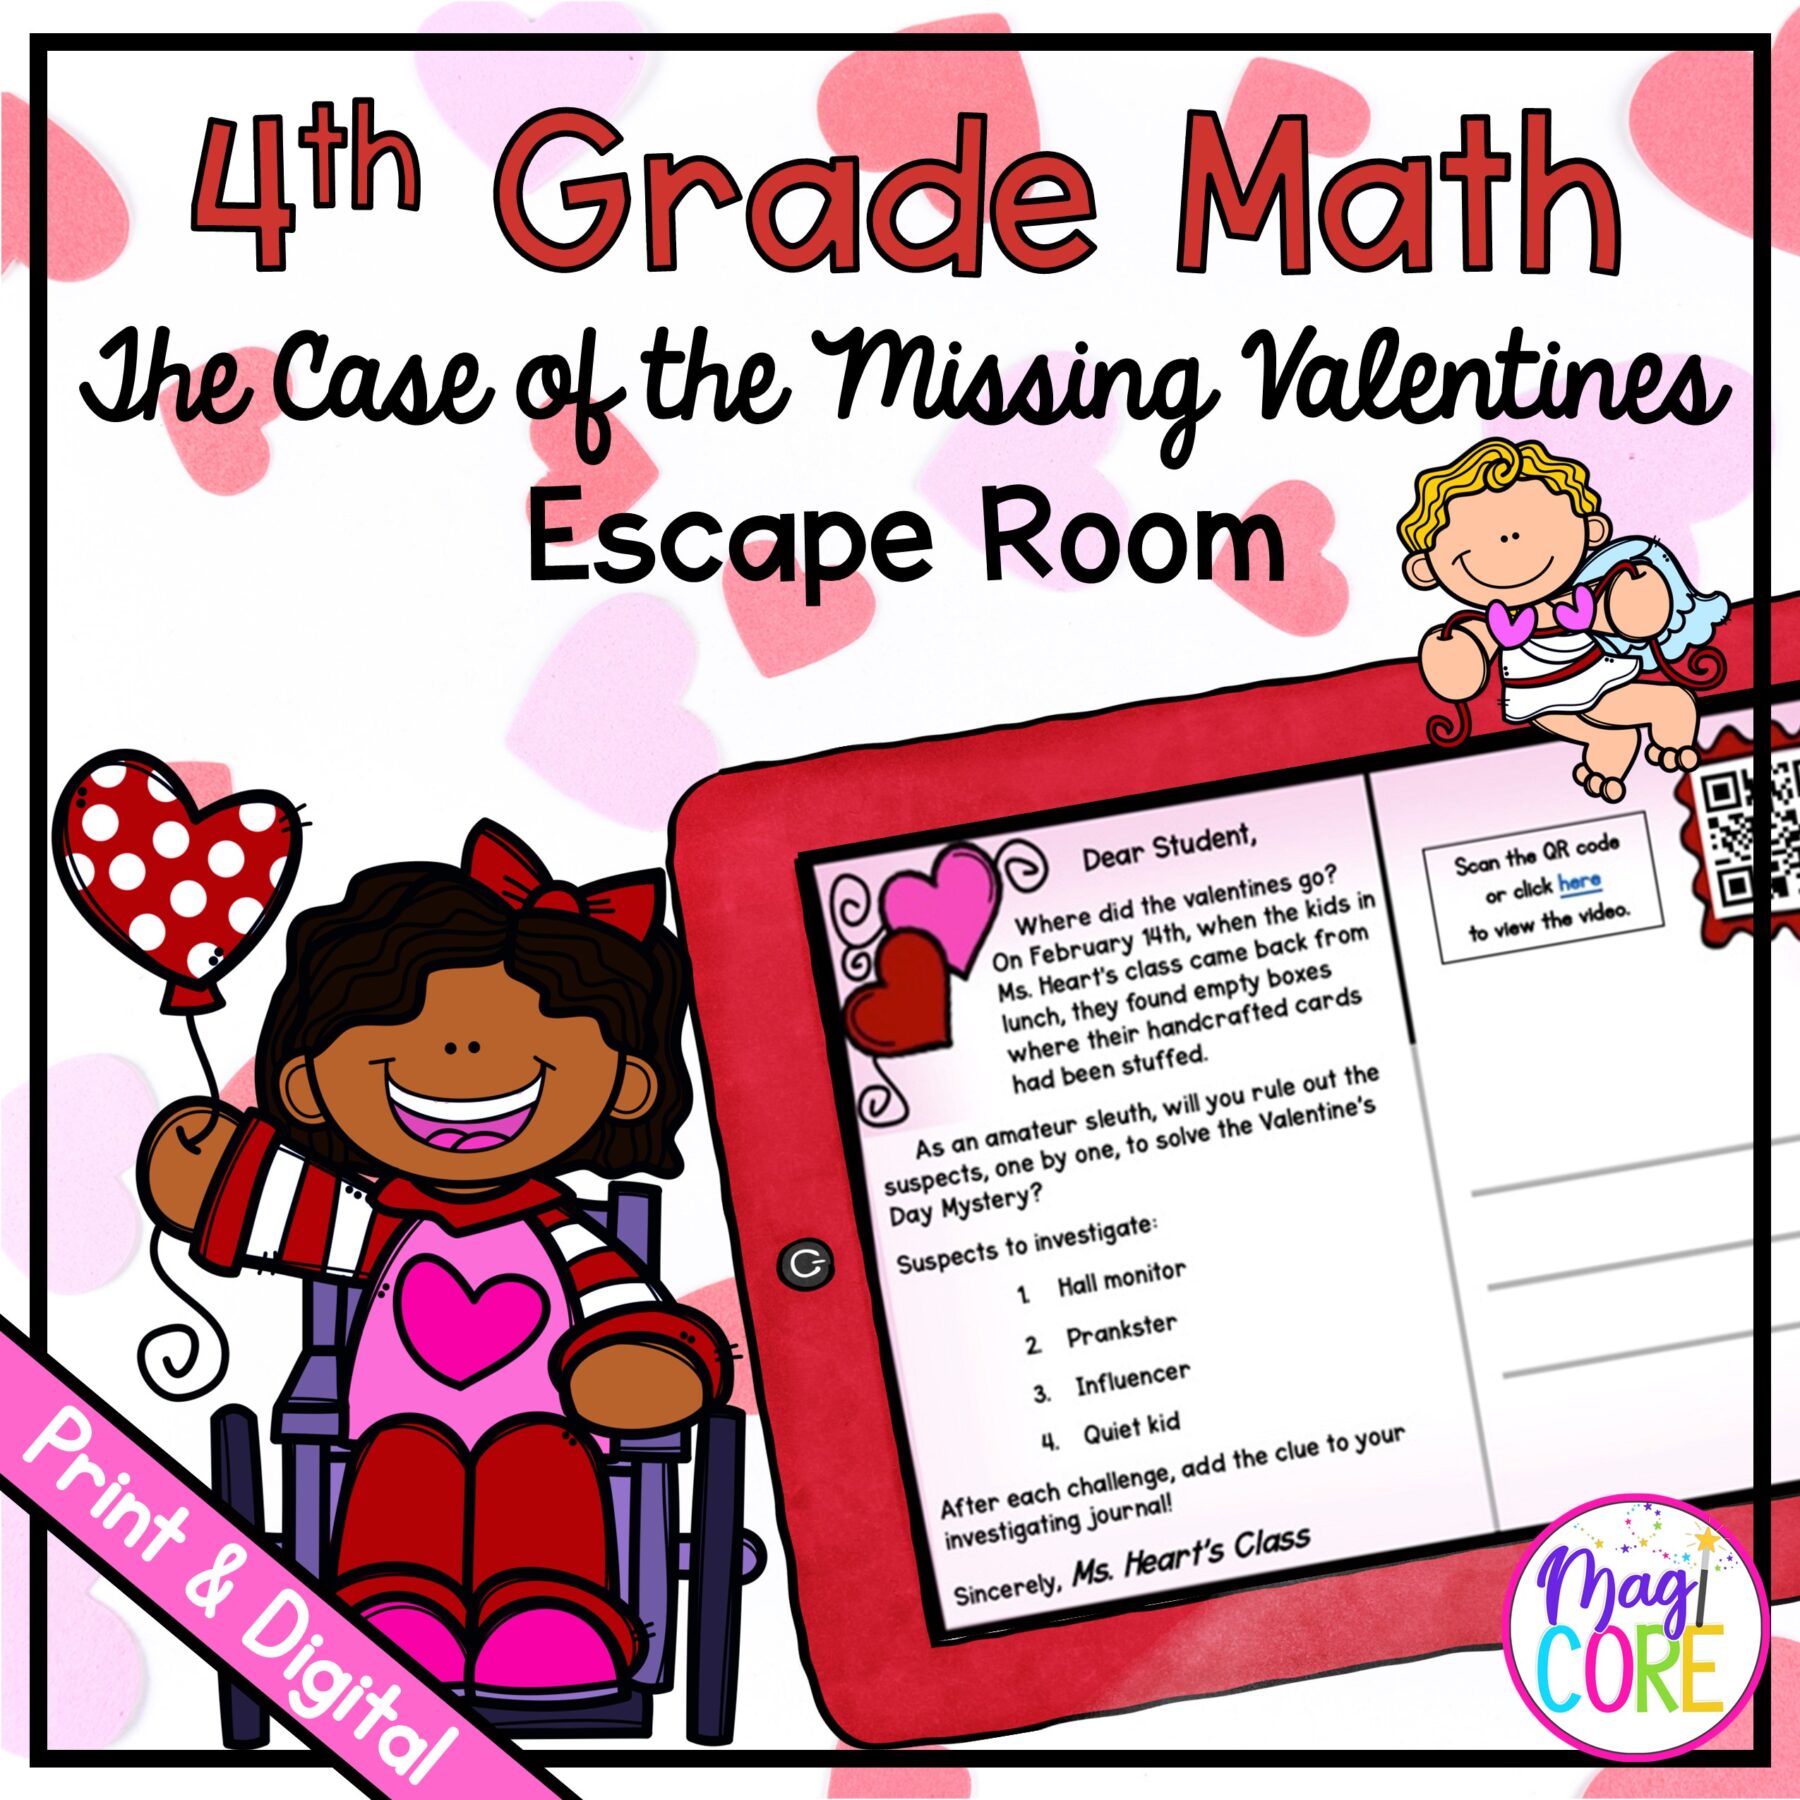 4th Grade Math The Case of Missing Valentines Escape Room & Webscape™